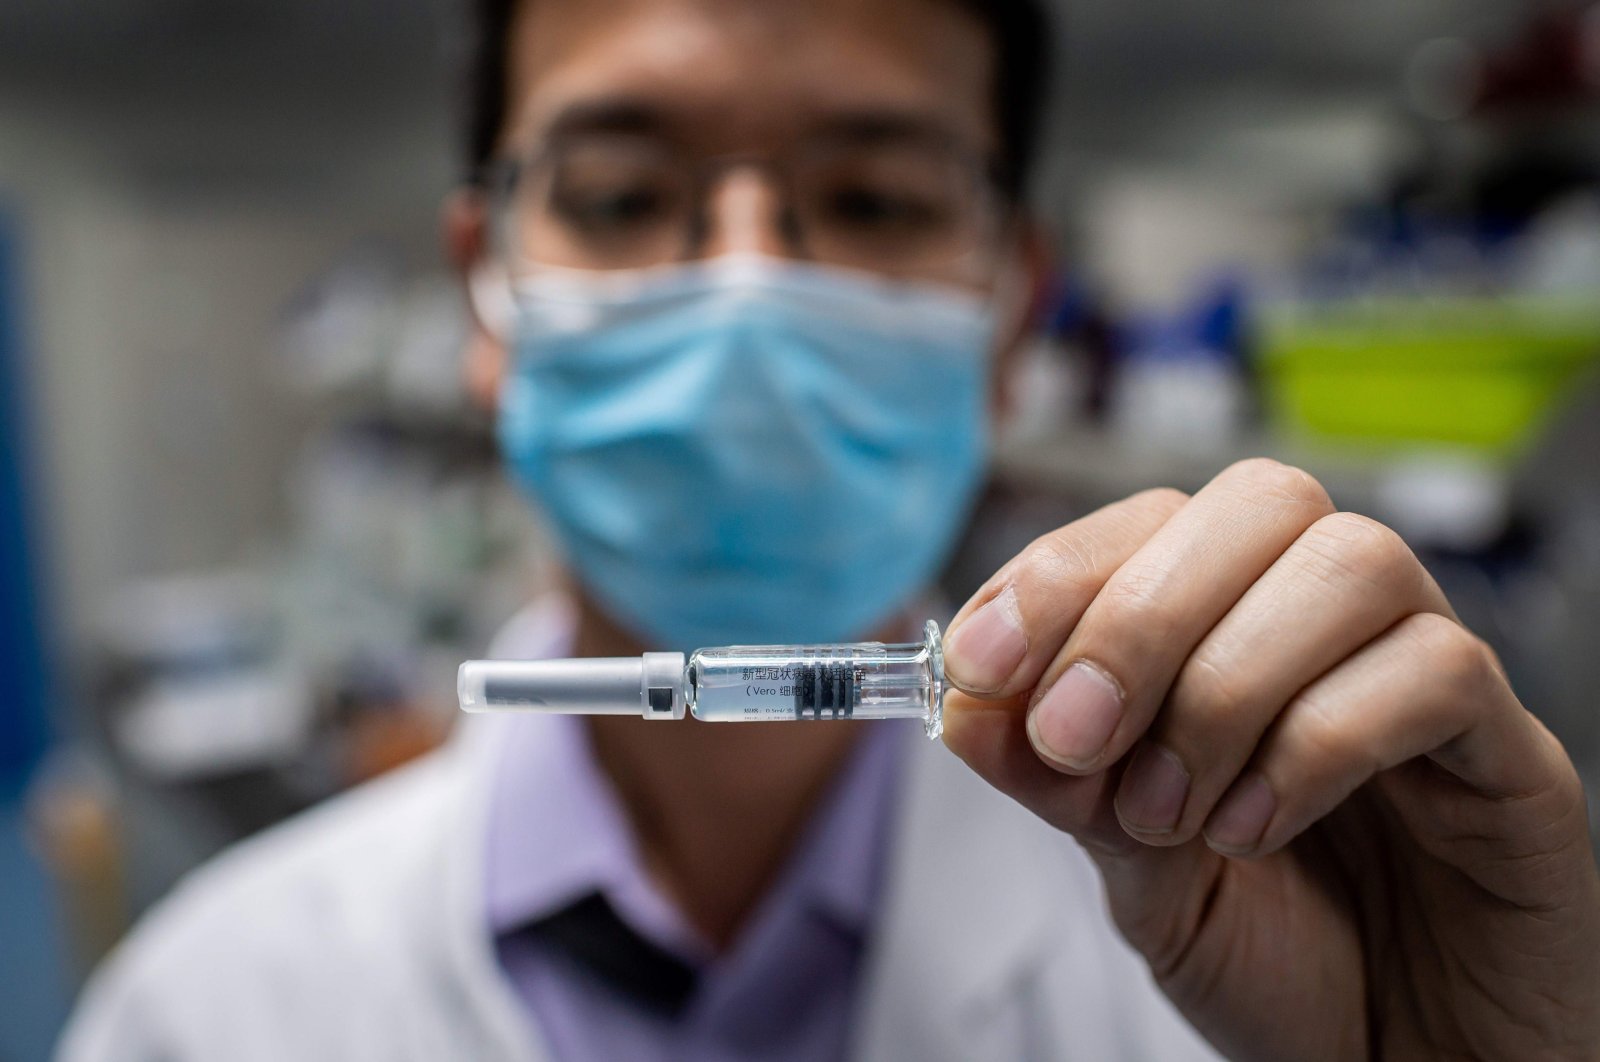 An engineer shows an experimental vaccine against COVID-19 that was tested at the Quality Control Laboratory at the Sinovac Biotech facilities in Beijing, April 29, 2020. (AFP Photo)